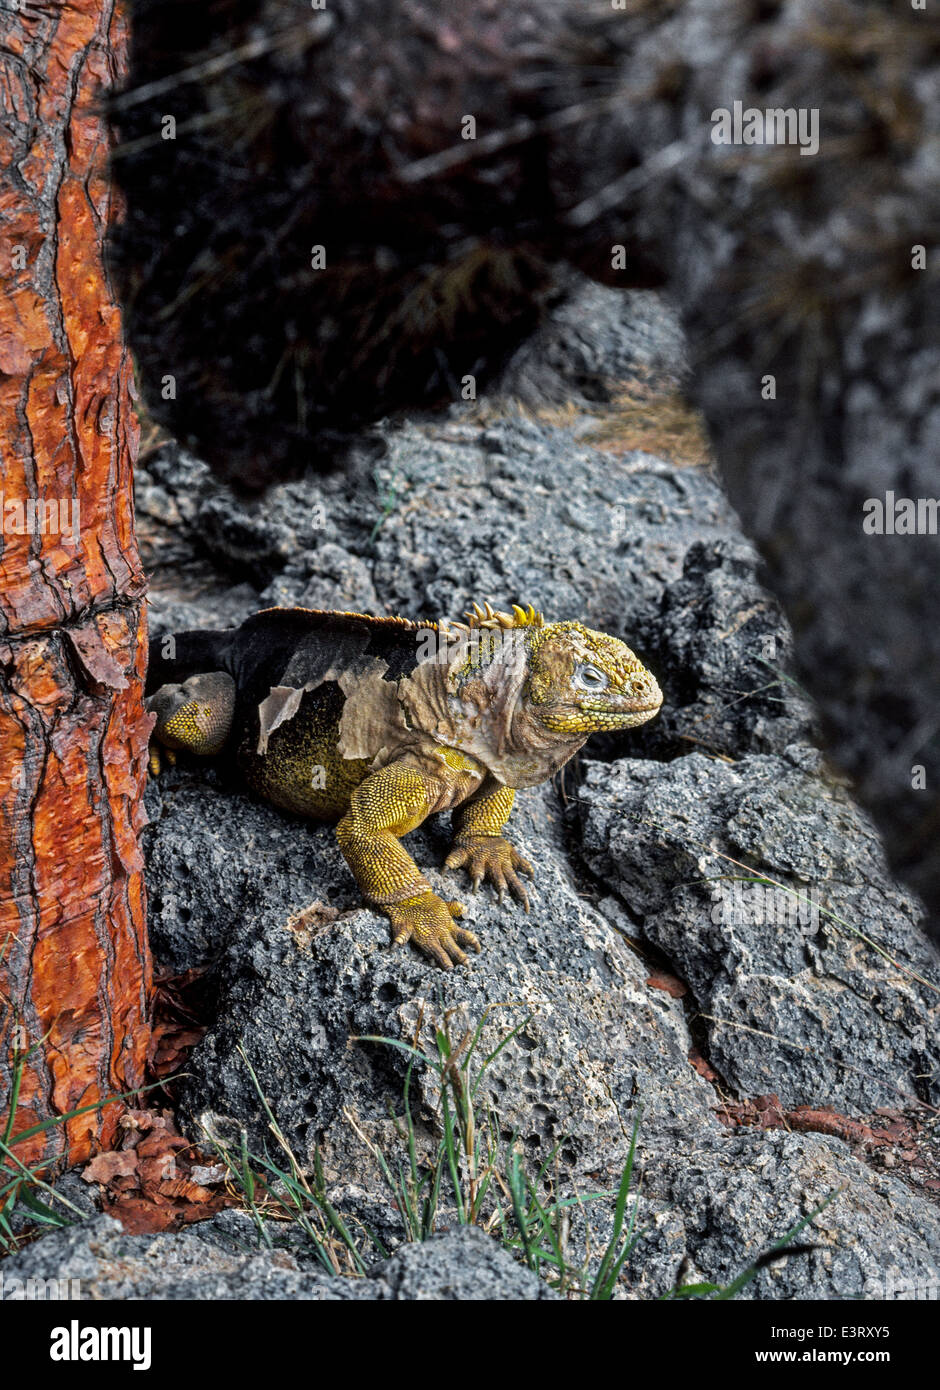 A scaly Galapagos land iguana that is shedding its skin crawls on South Plaza Island in the Galapagos Islands, a province of Ecuador, South America. Stock Photo